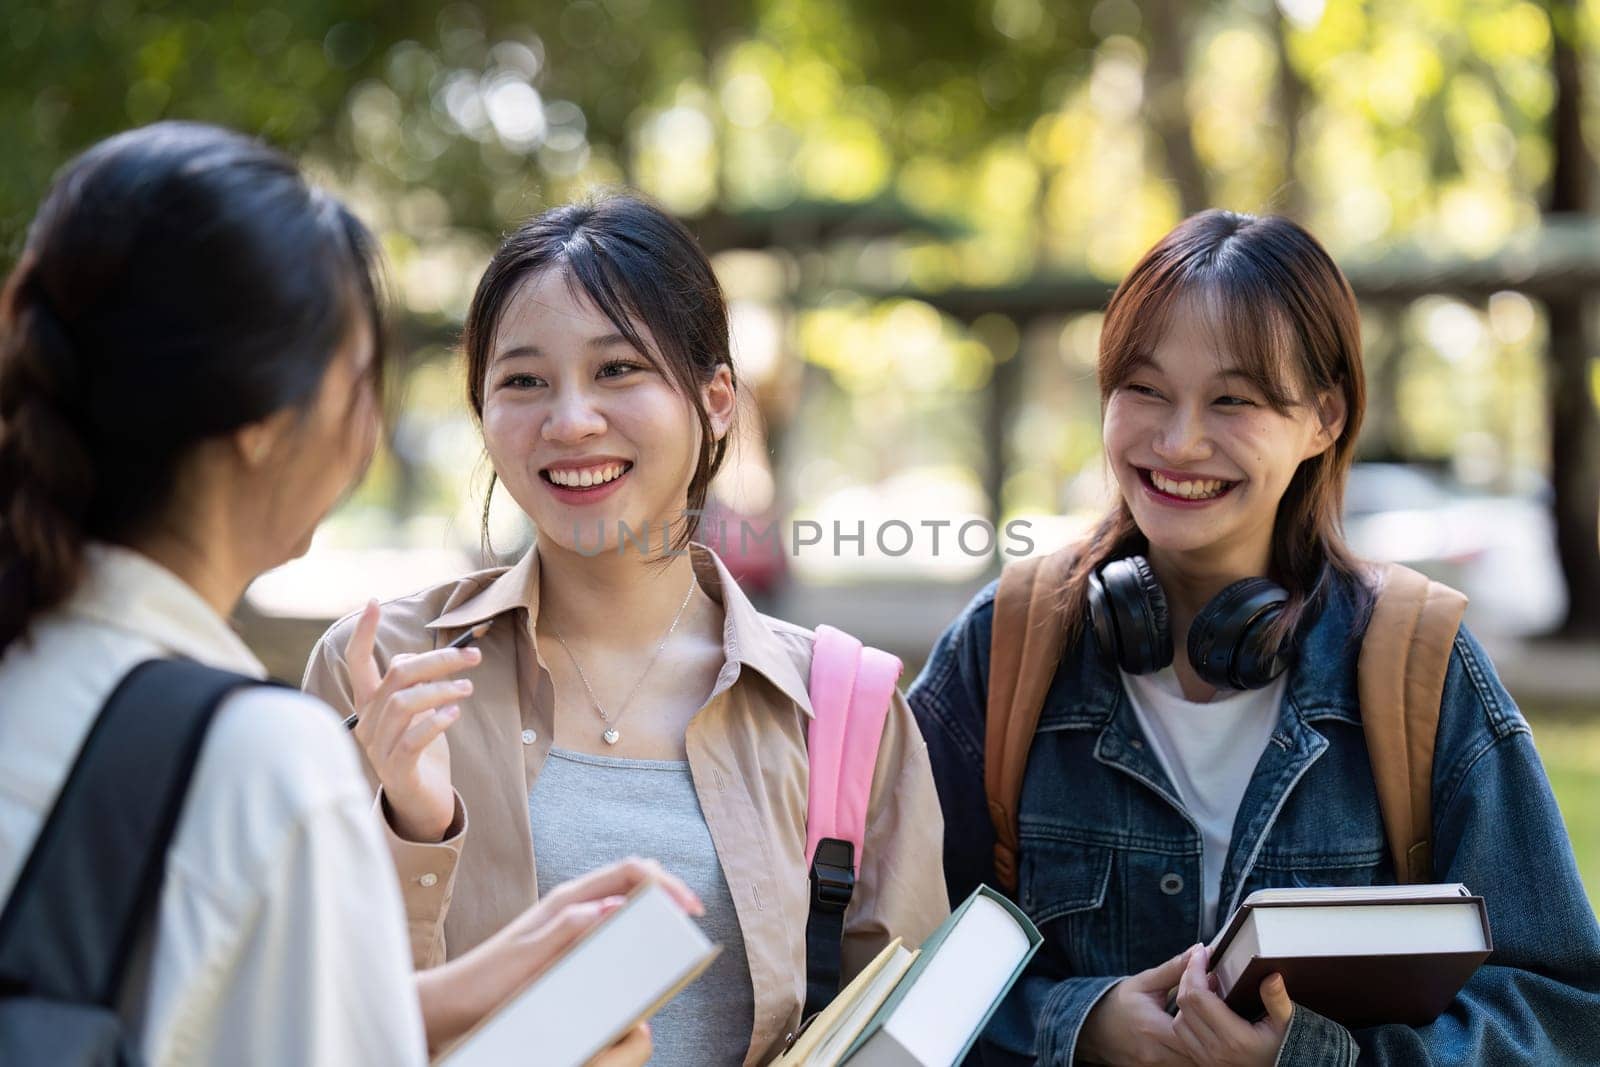 Happy students walking together on university campus, chatting and laughing outdoors after classes by itchaznong